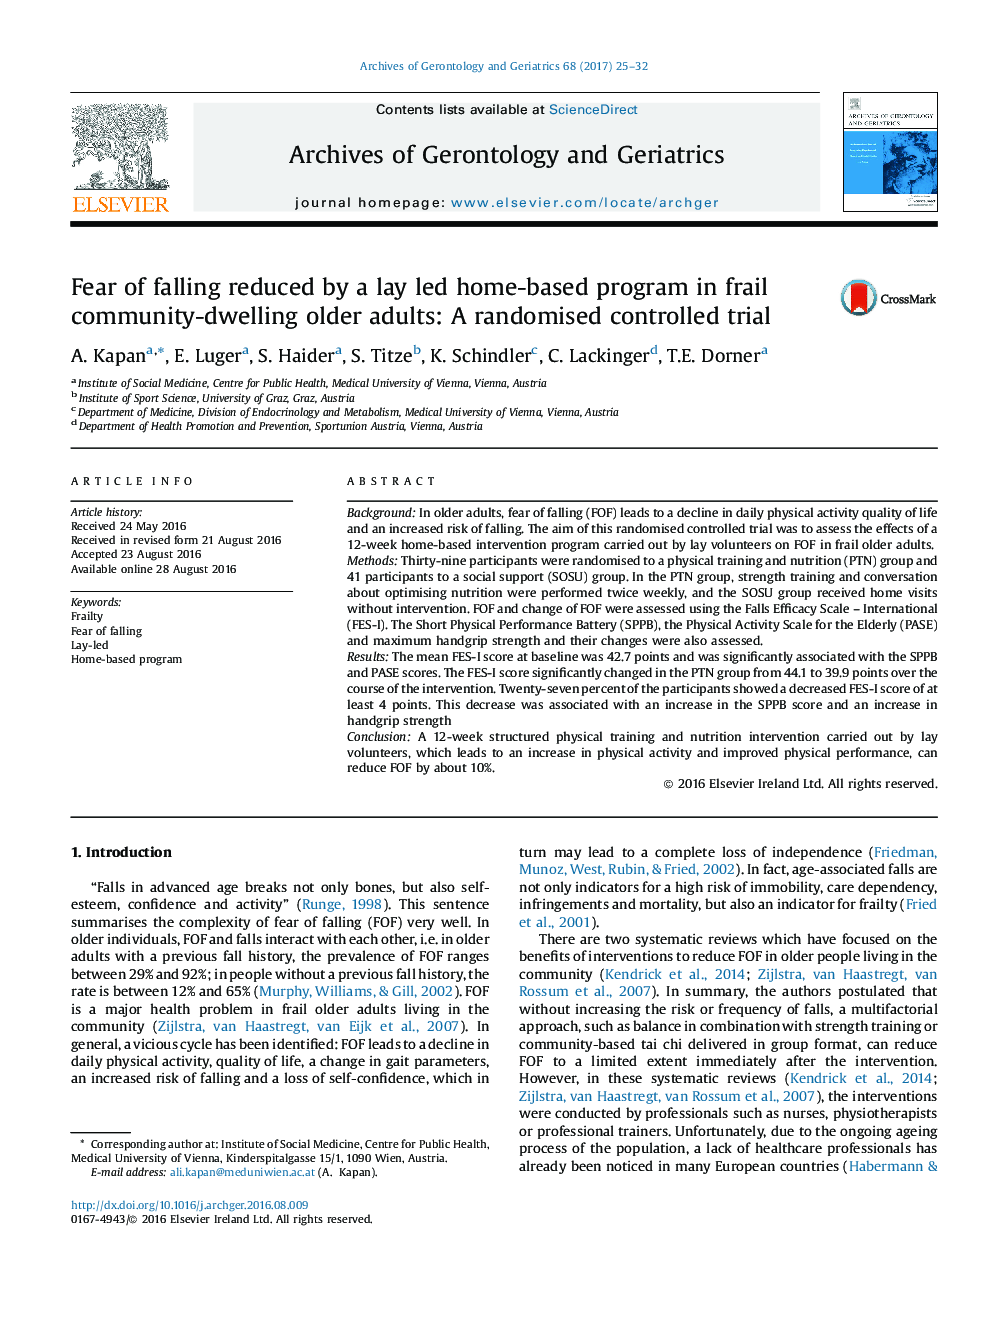 Fear of falling reduced by a lay led home-based program in frail community-dwelling older adults: A randomised controlled trial